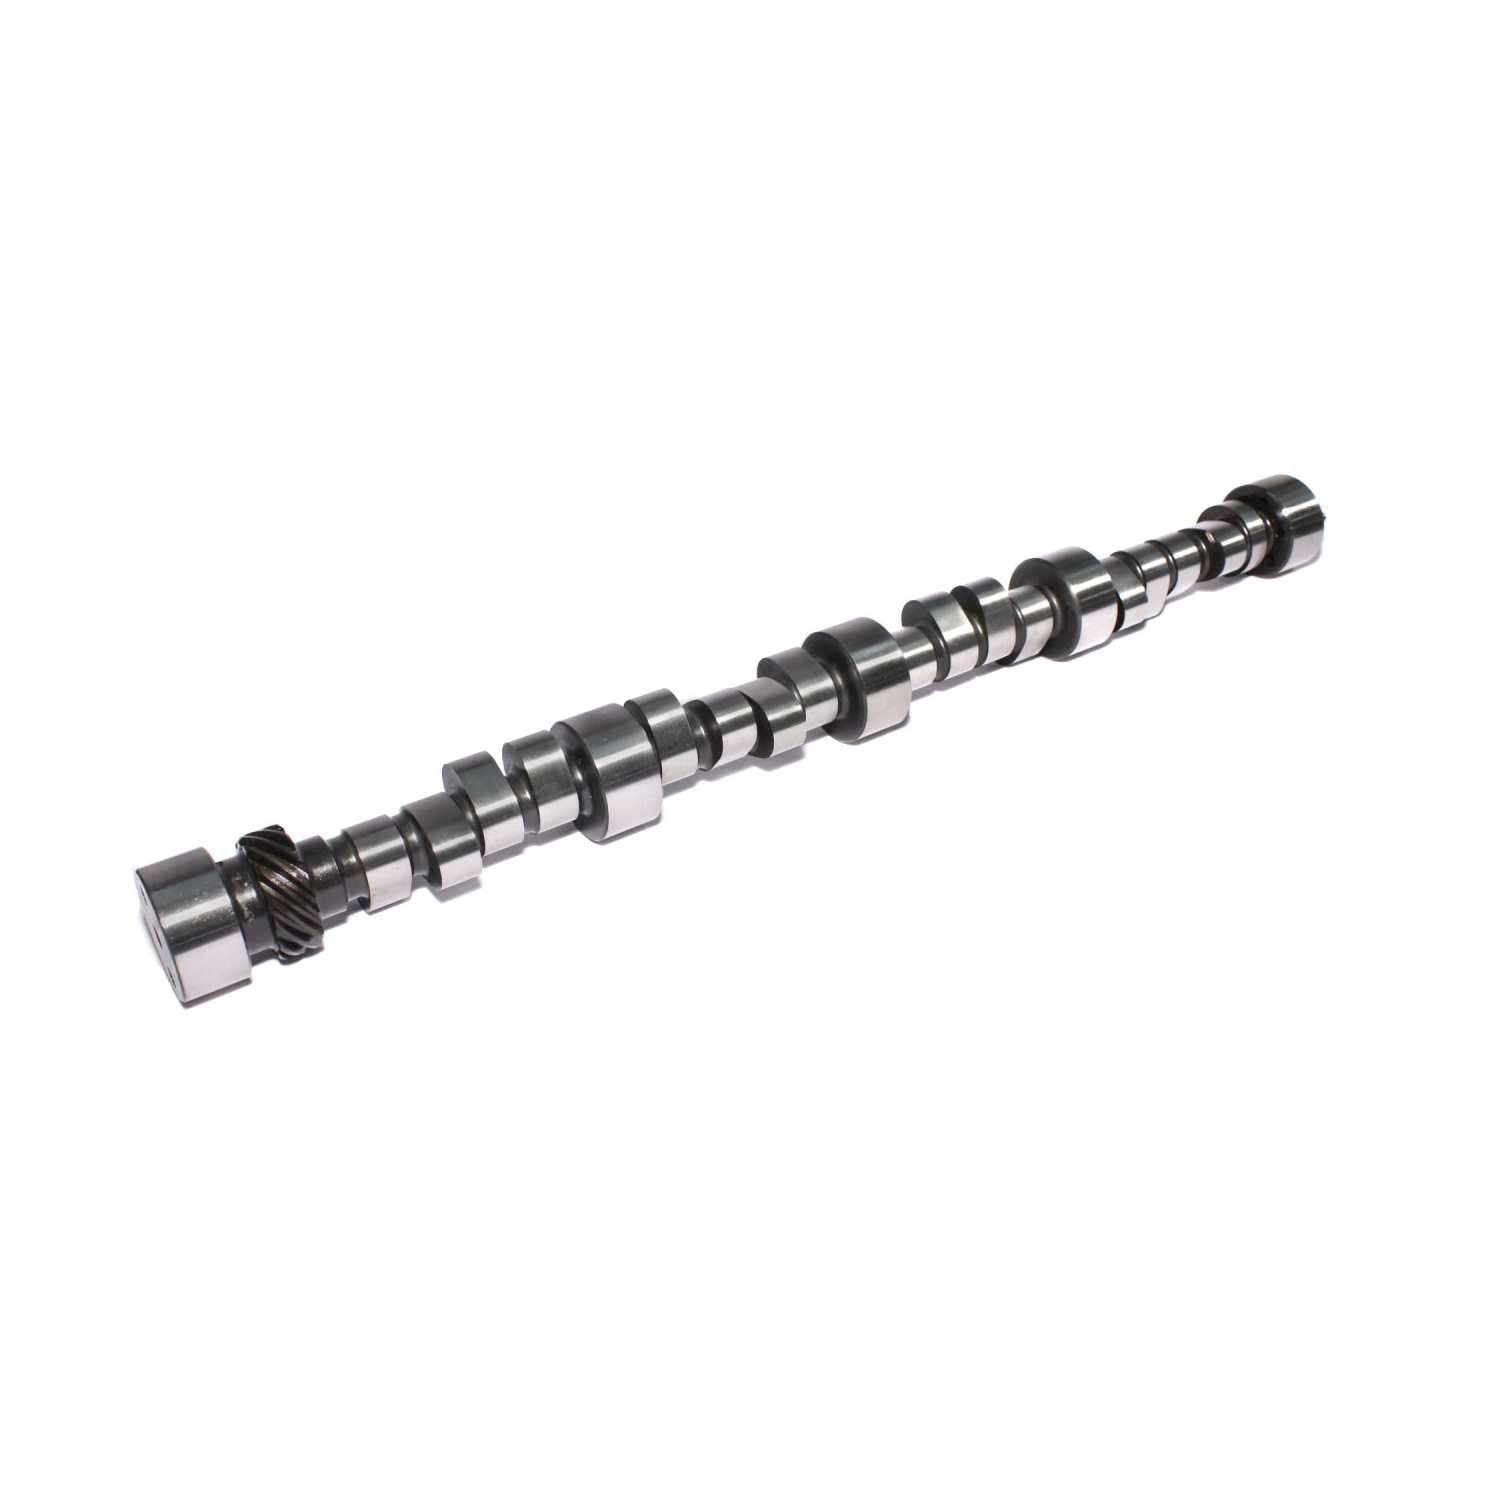 Competition Cams 11-740-9 Drag Race Camshaft